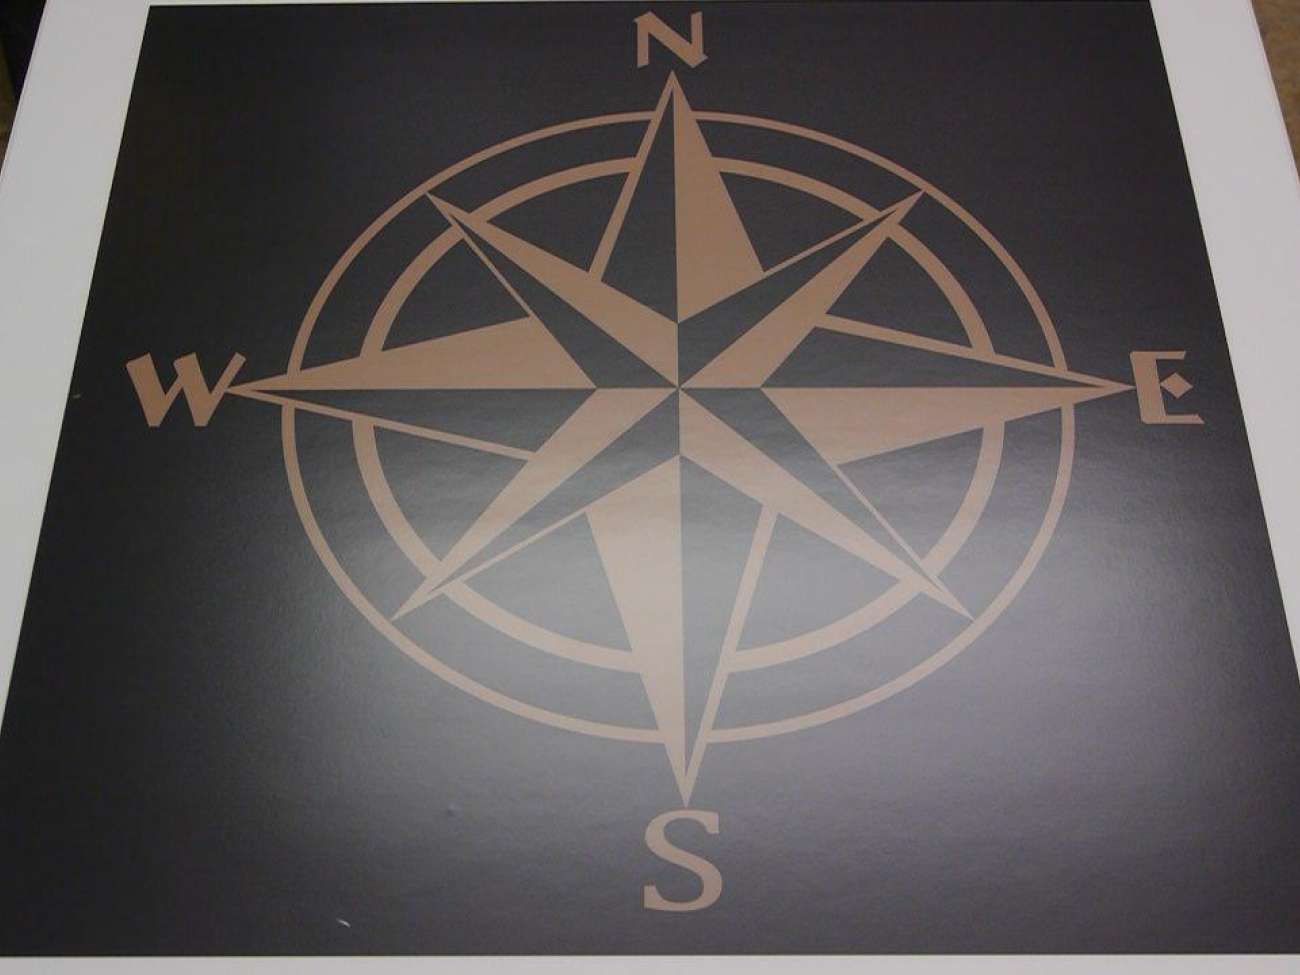 A compass in GRH's KW sanctuary